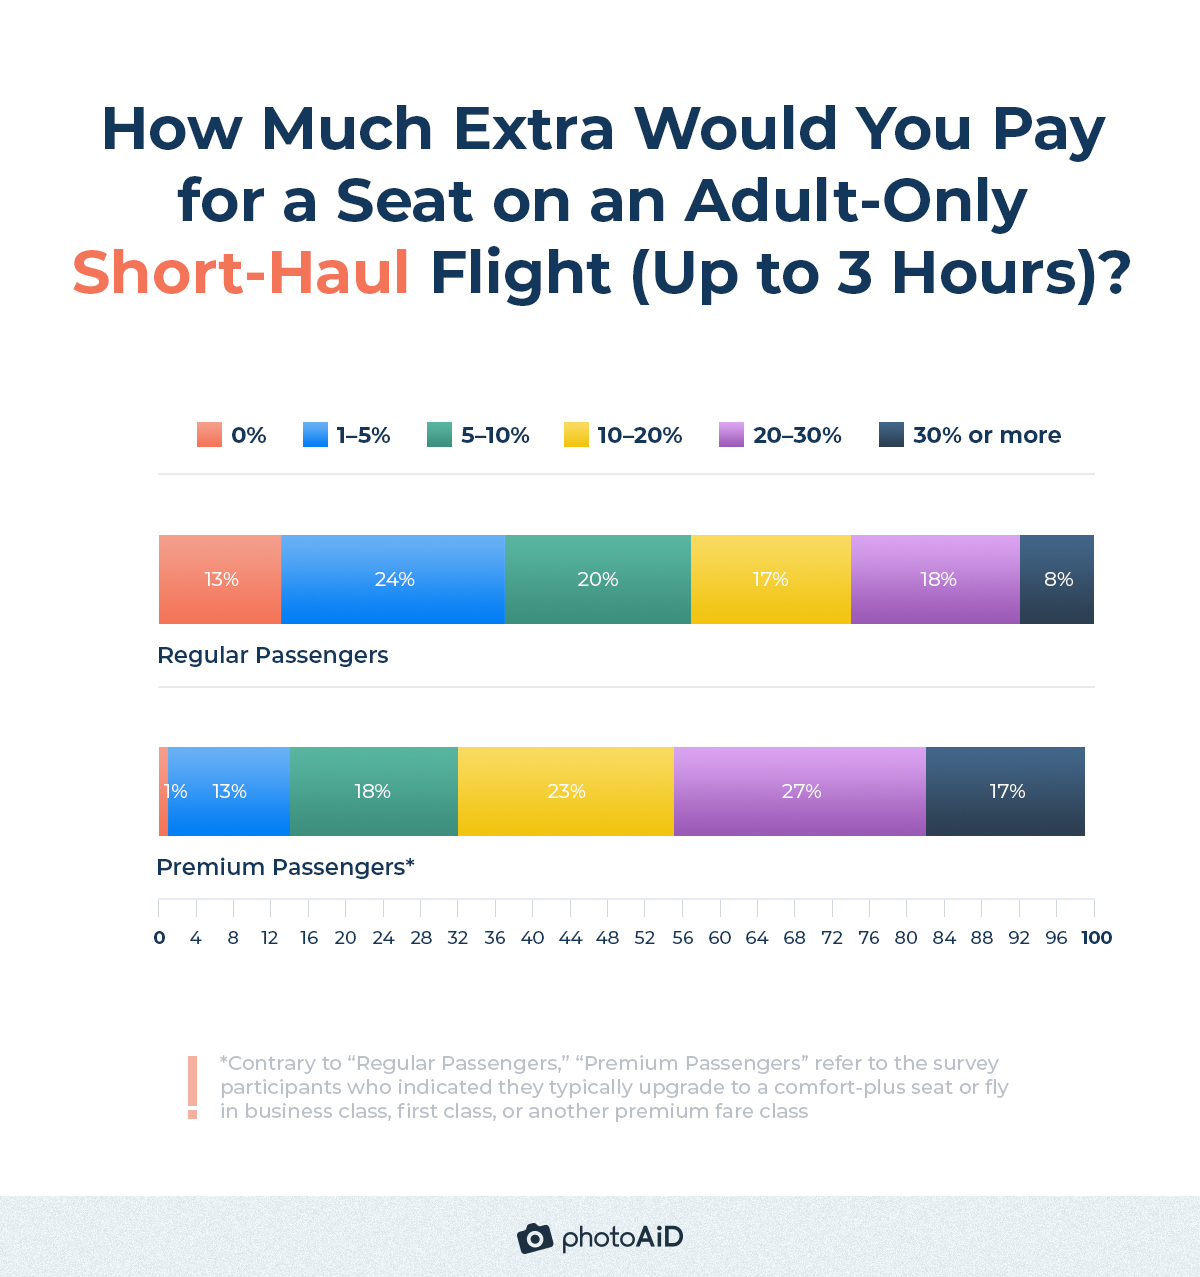 most travelers (55%) will spend between 10 and 30% or more on an adult-only short-haul flight